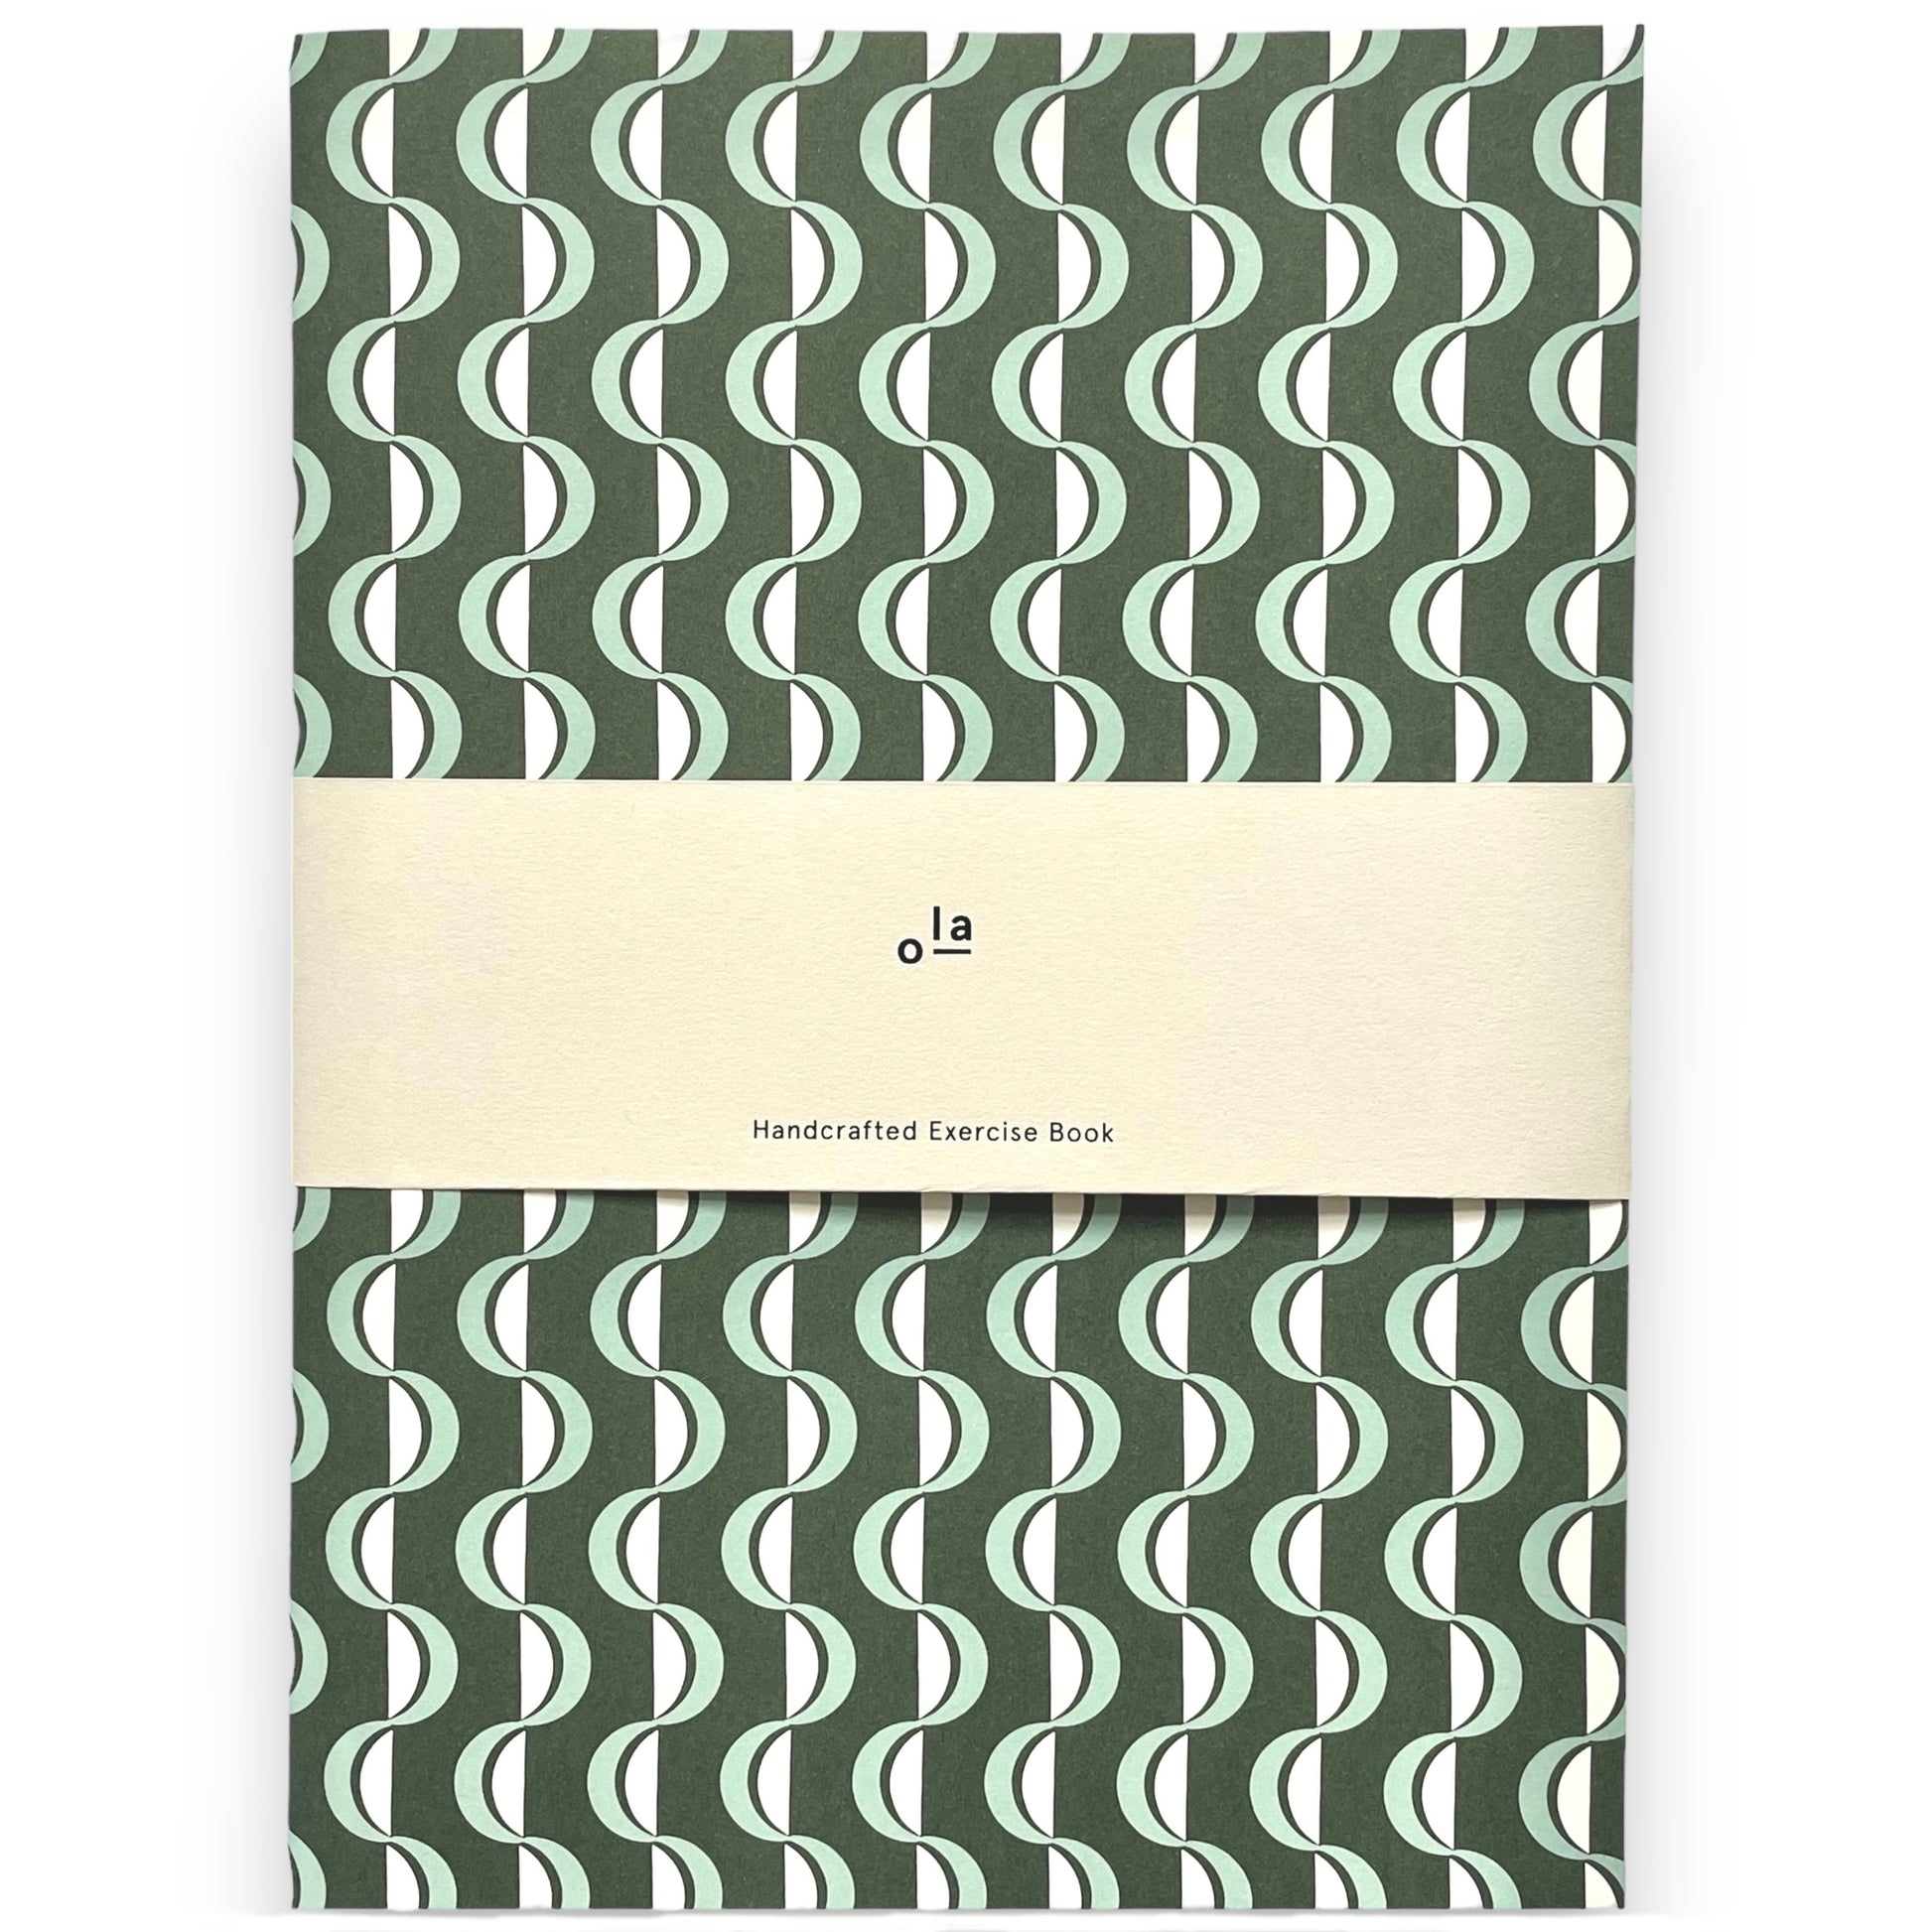 slimline softcover exercise book by Ola Studio, with plain pages. Front cover is a wavy stripe design in dark green and aqua on white. Pictured with branded presentation band